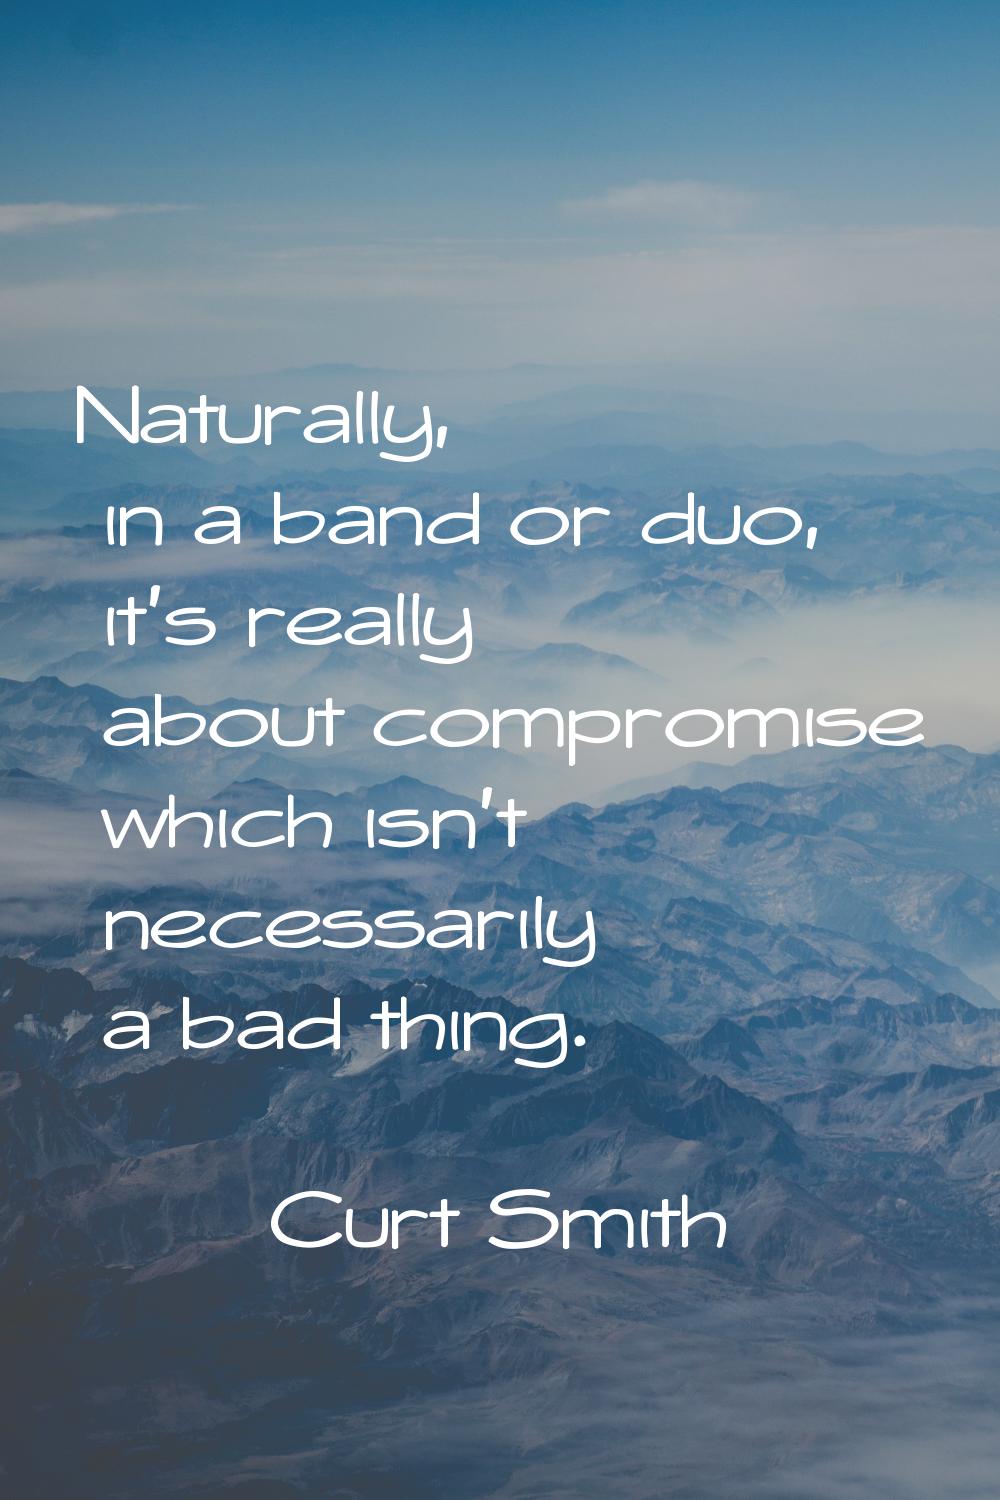 Naturally, in a band or duo, it's really about compromise which isn't necessarily a bad thing.